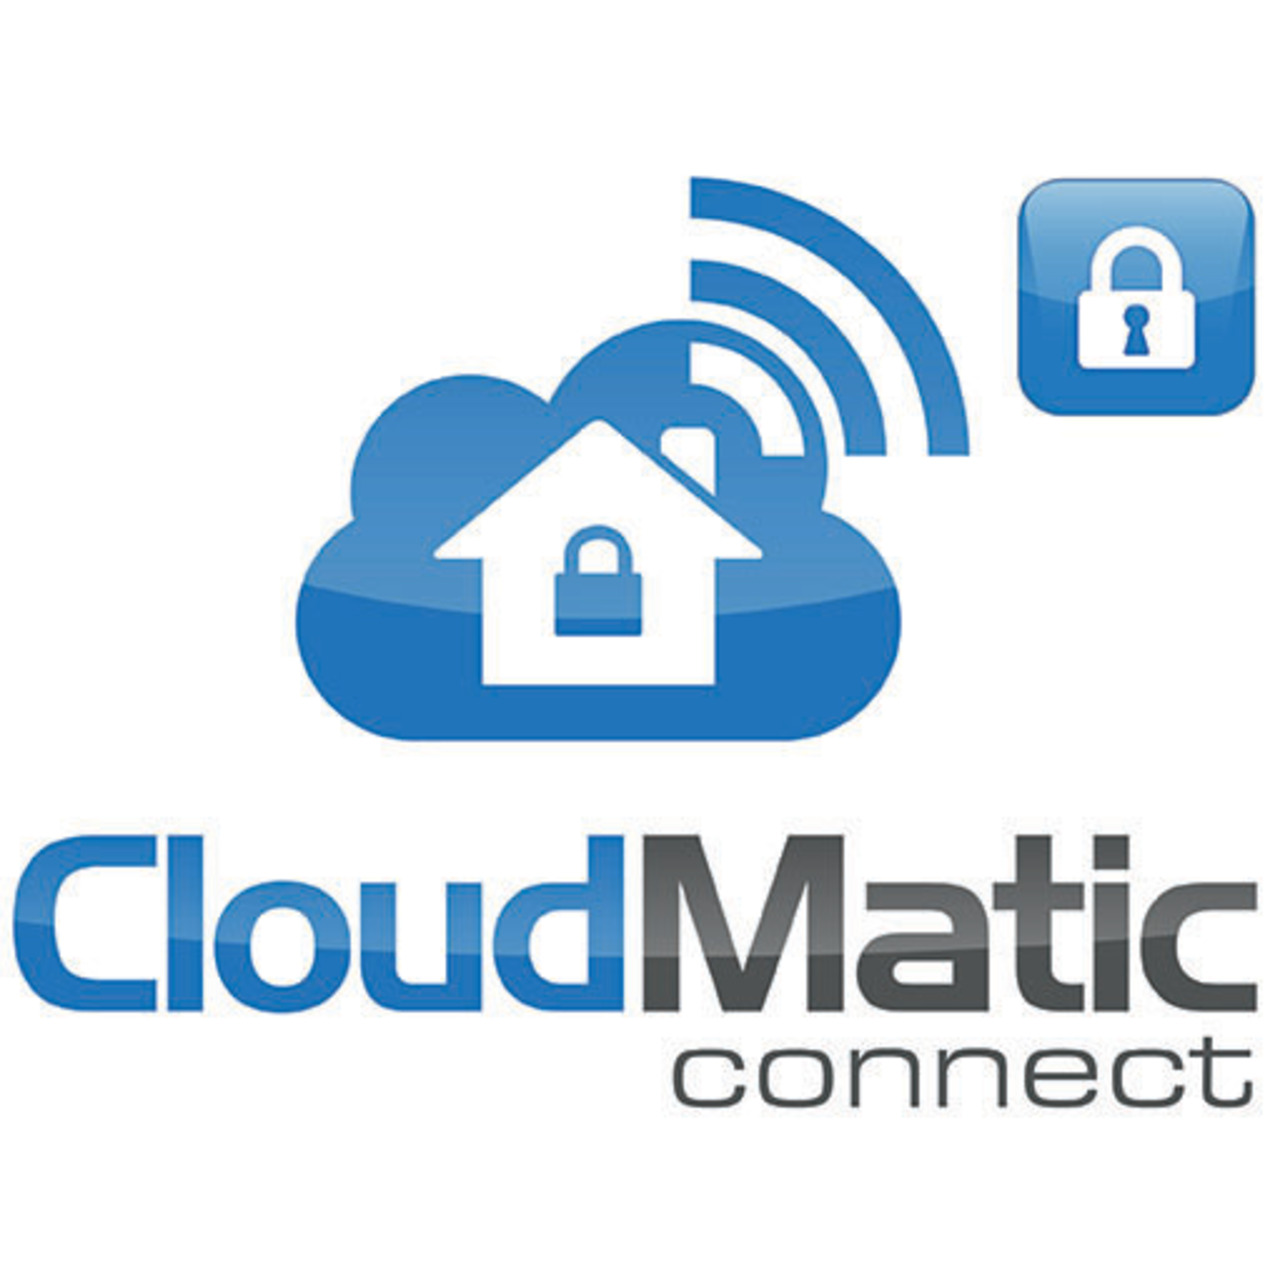 CloudMatic connect- 12 Monate Fernzugang fr Homematic Smart Home - Hausautomation unter Hausautomation